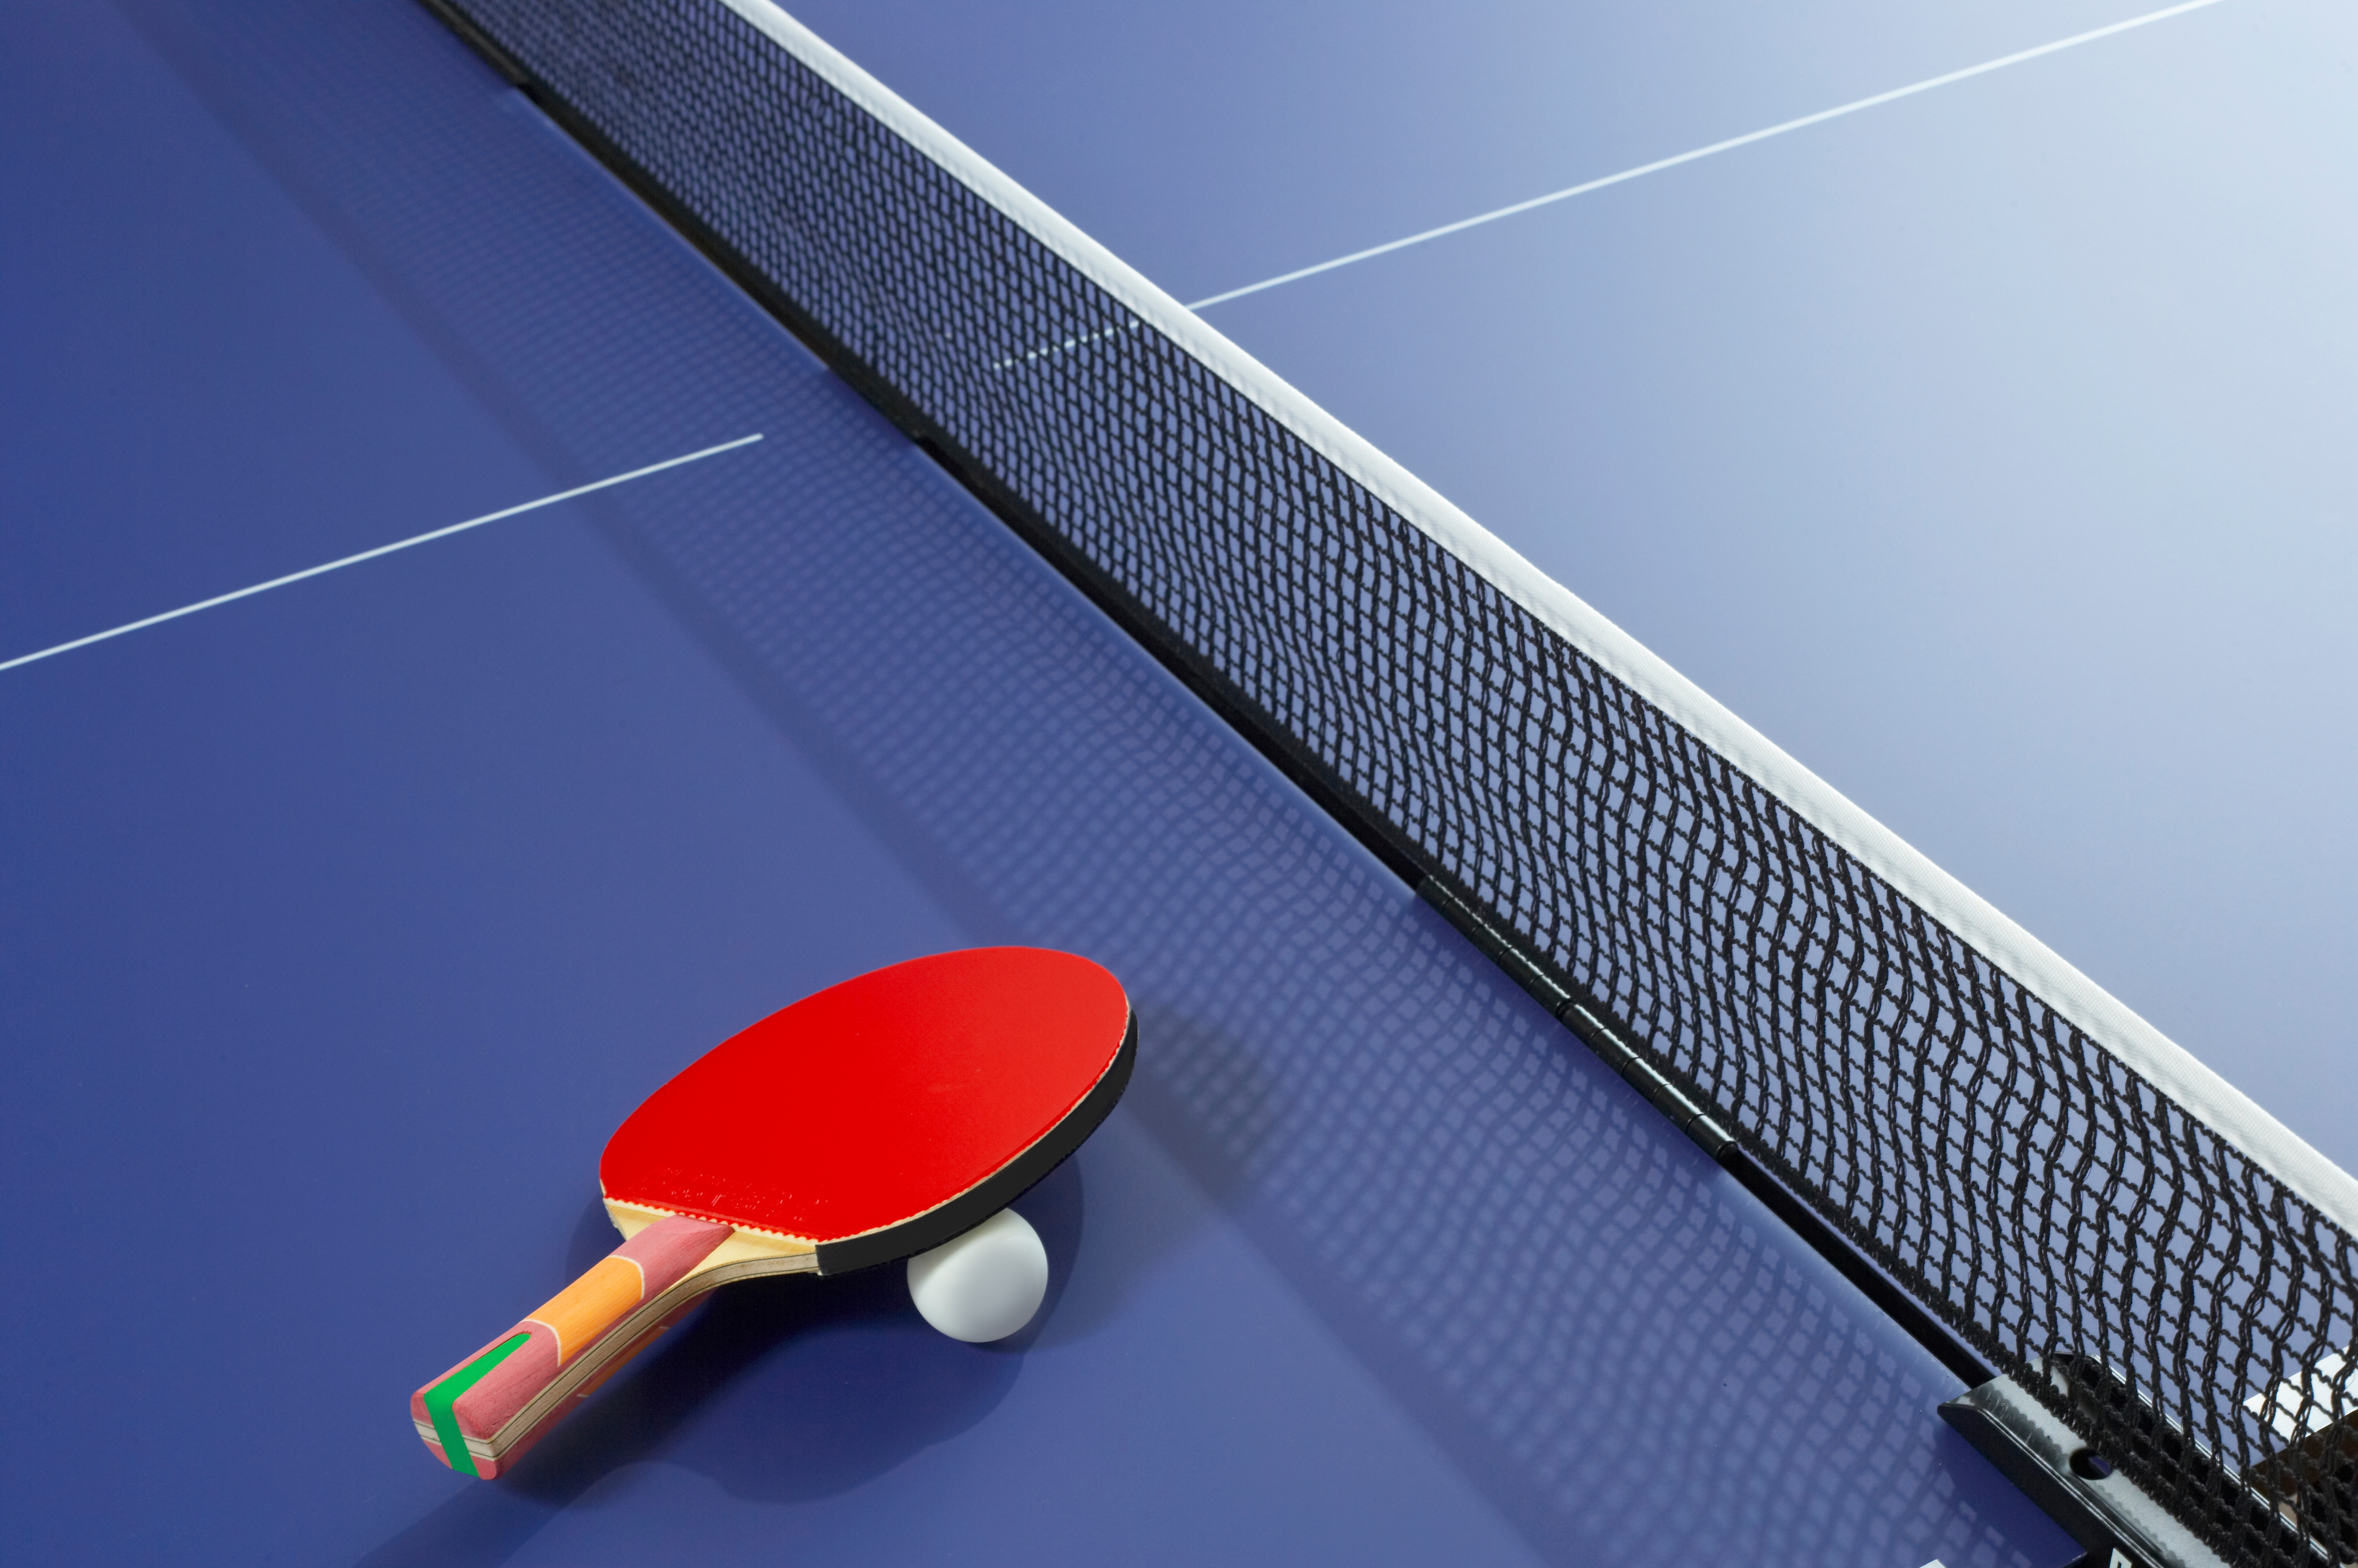 About Table Tennis (Ping Pong)